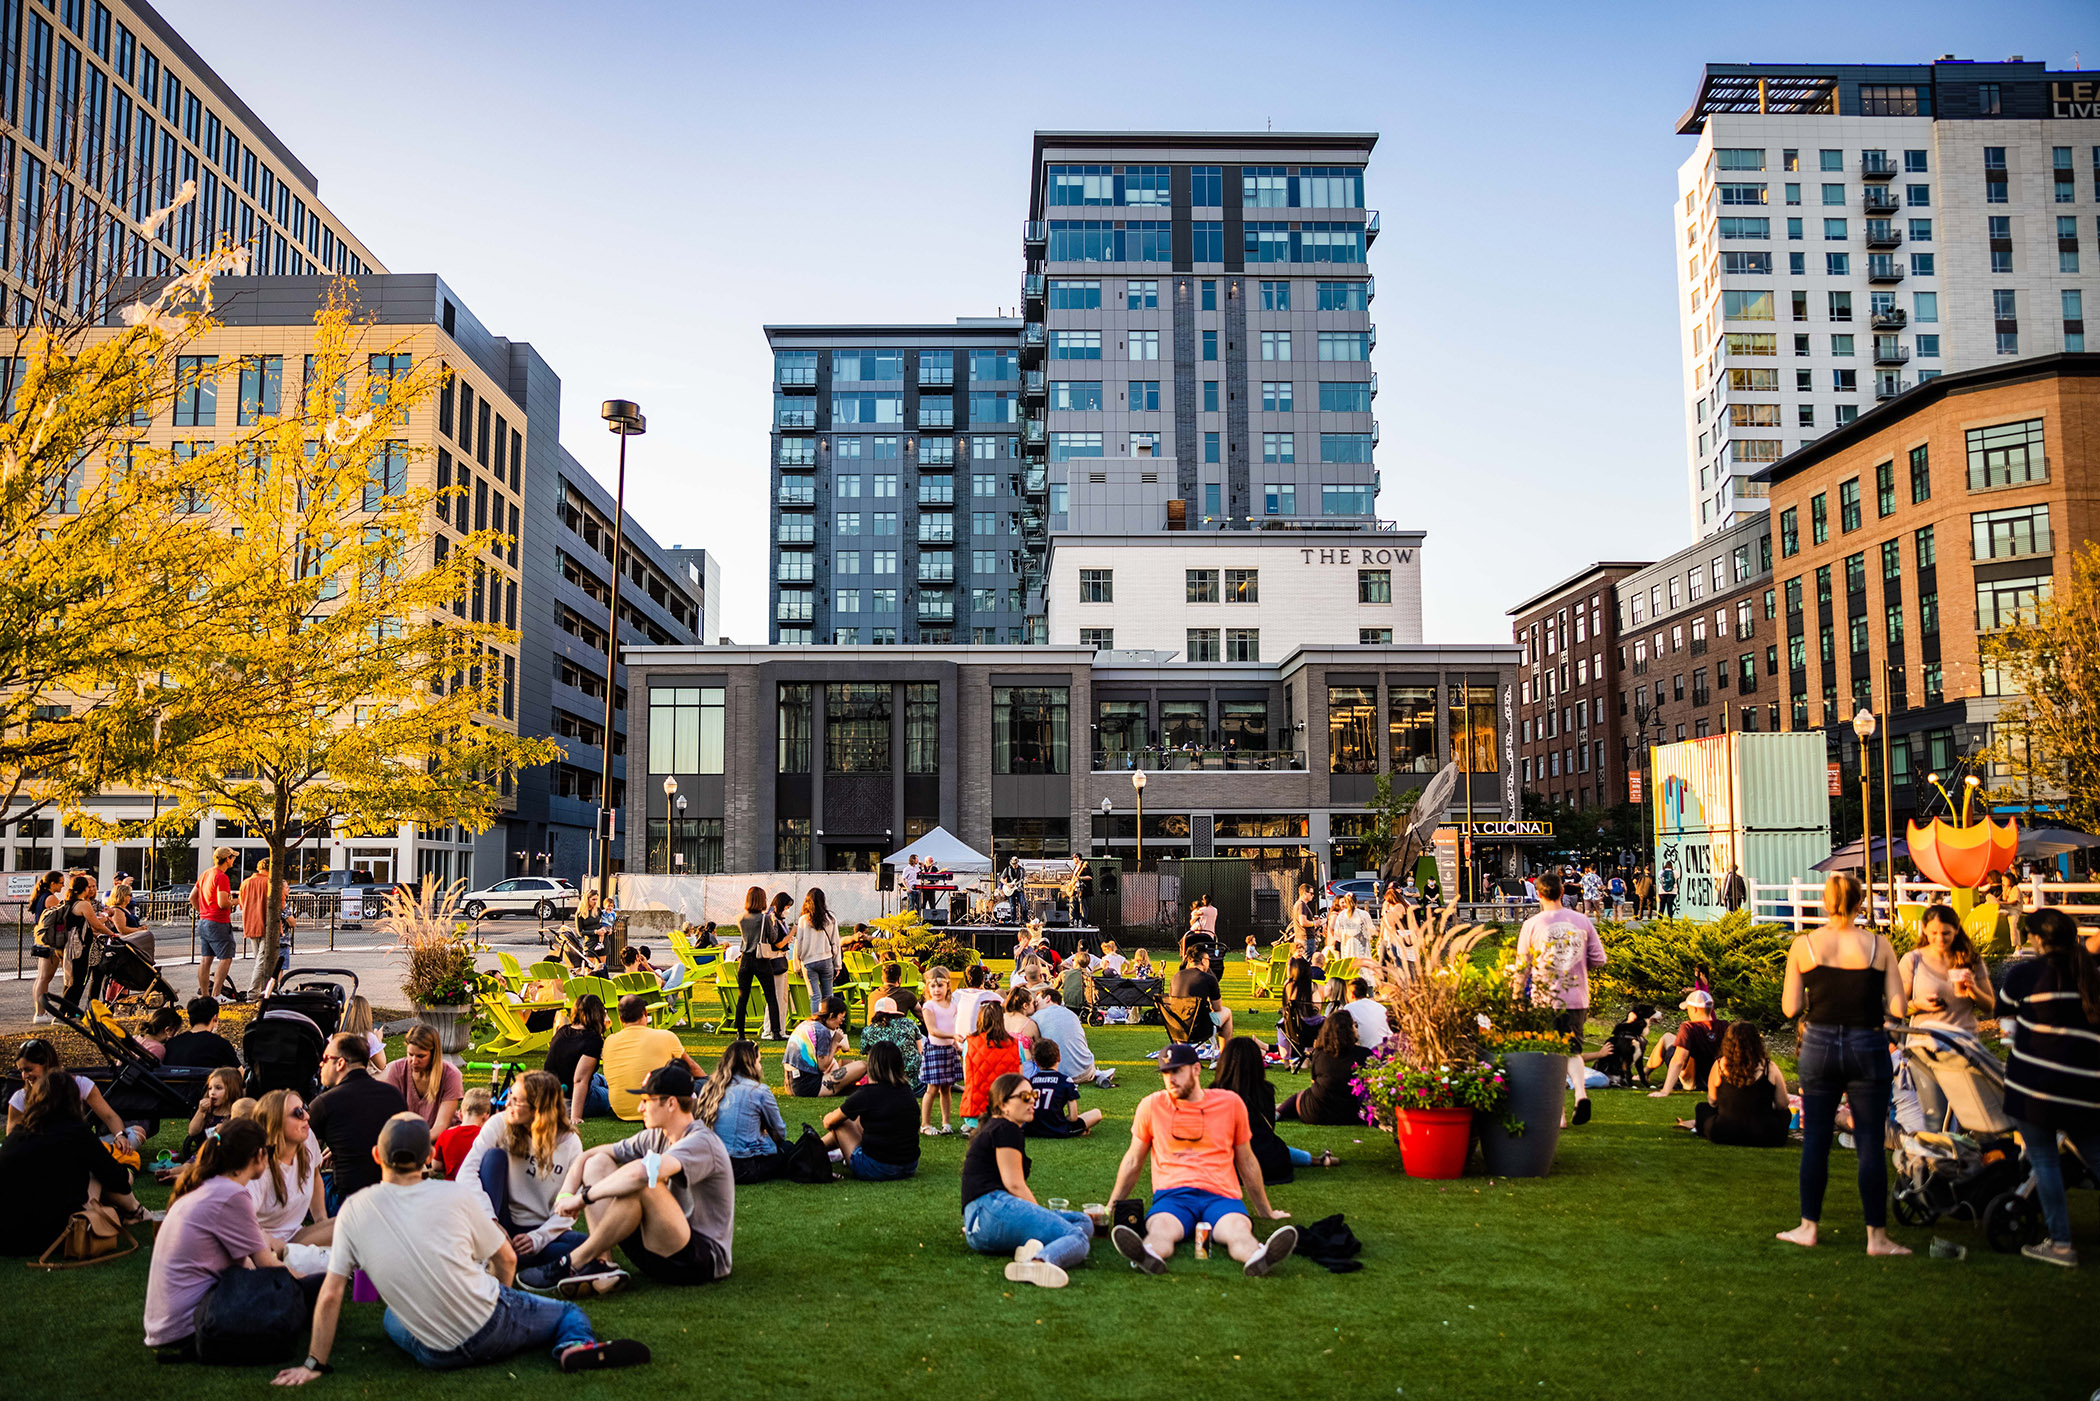 groups of picnickers gather for an event on a grass lawn in front of a mixed-use city backdrop